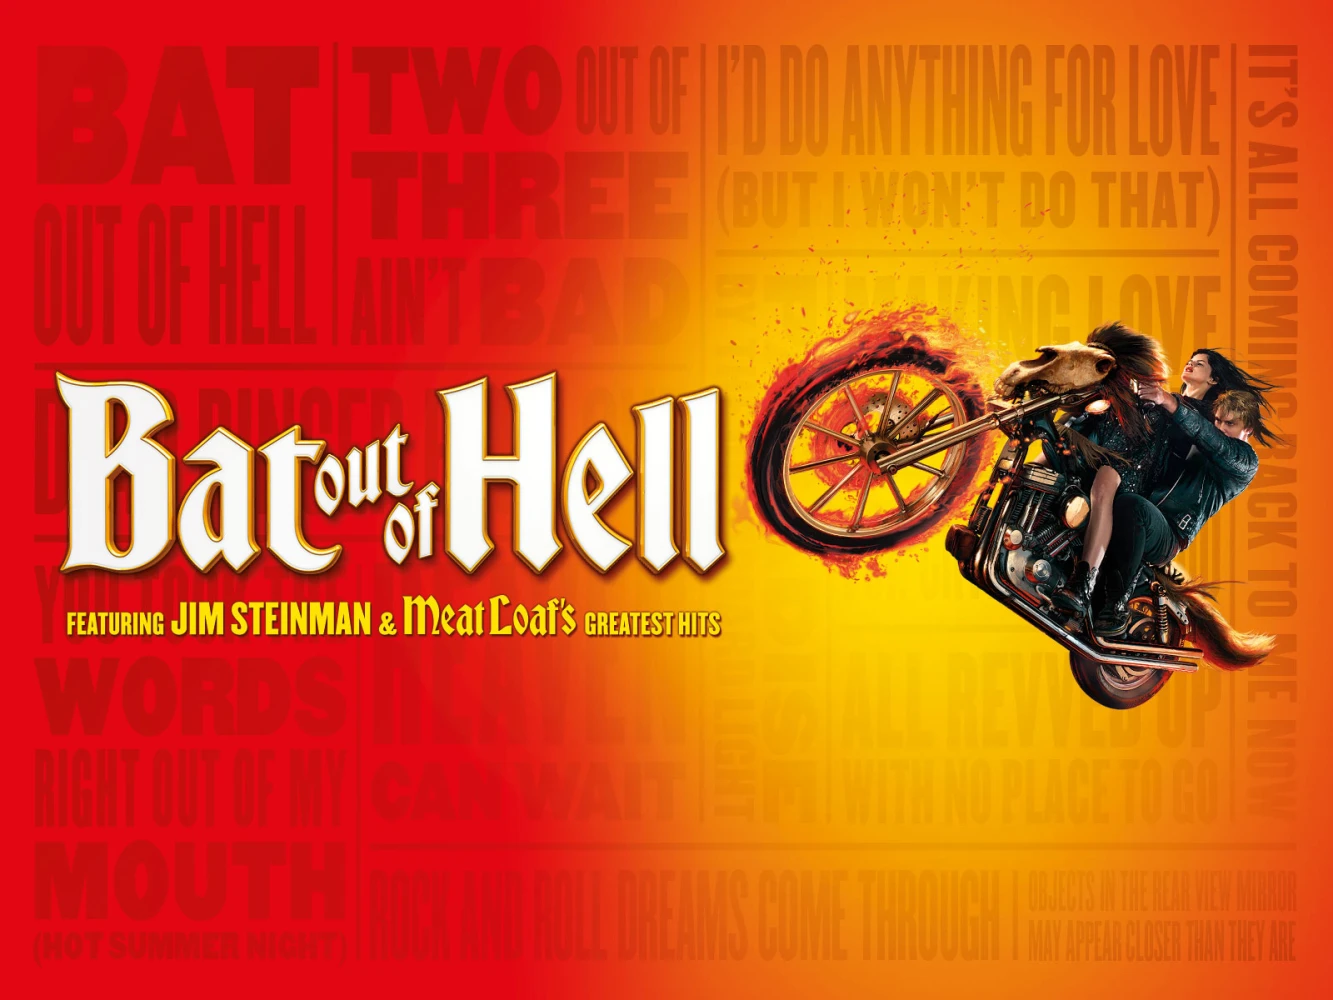 Bat Out Of Hell - The Rock Musical: What to expect - 2